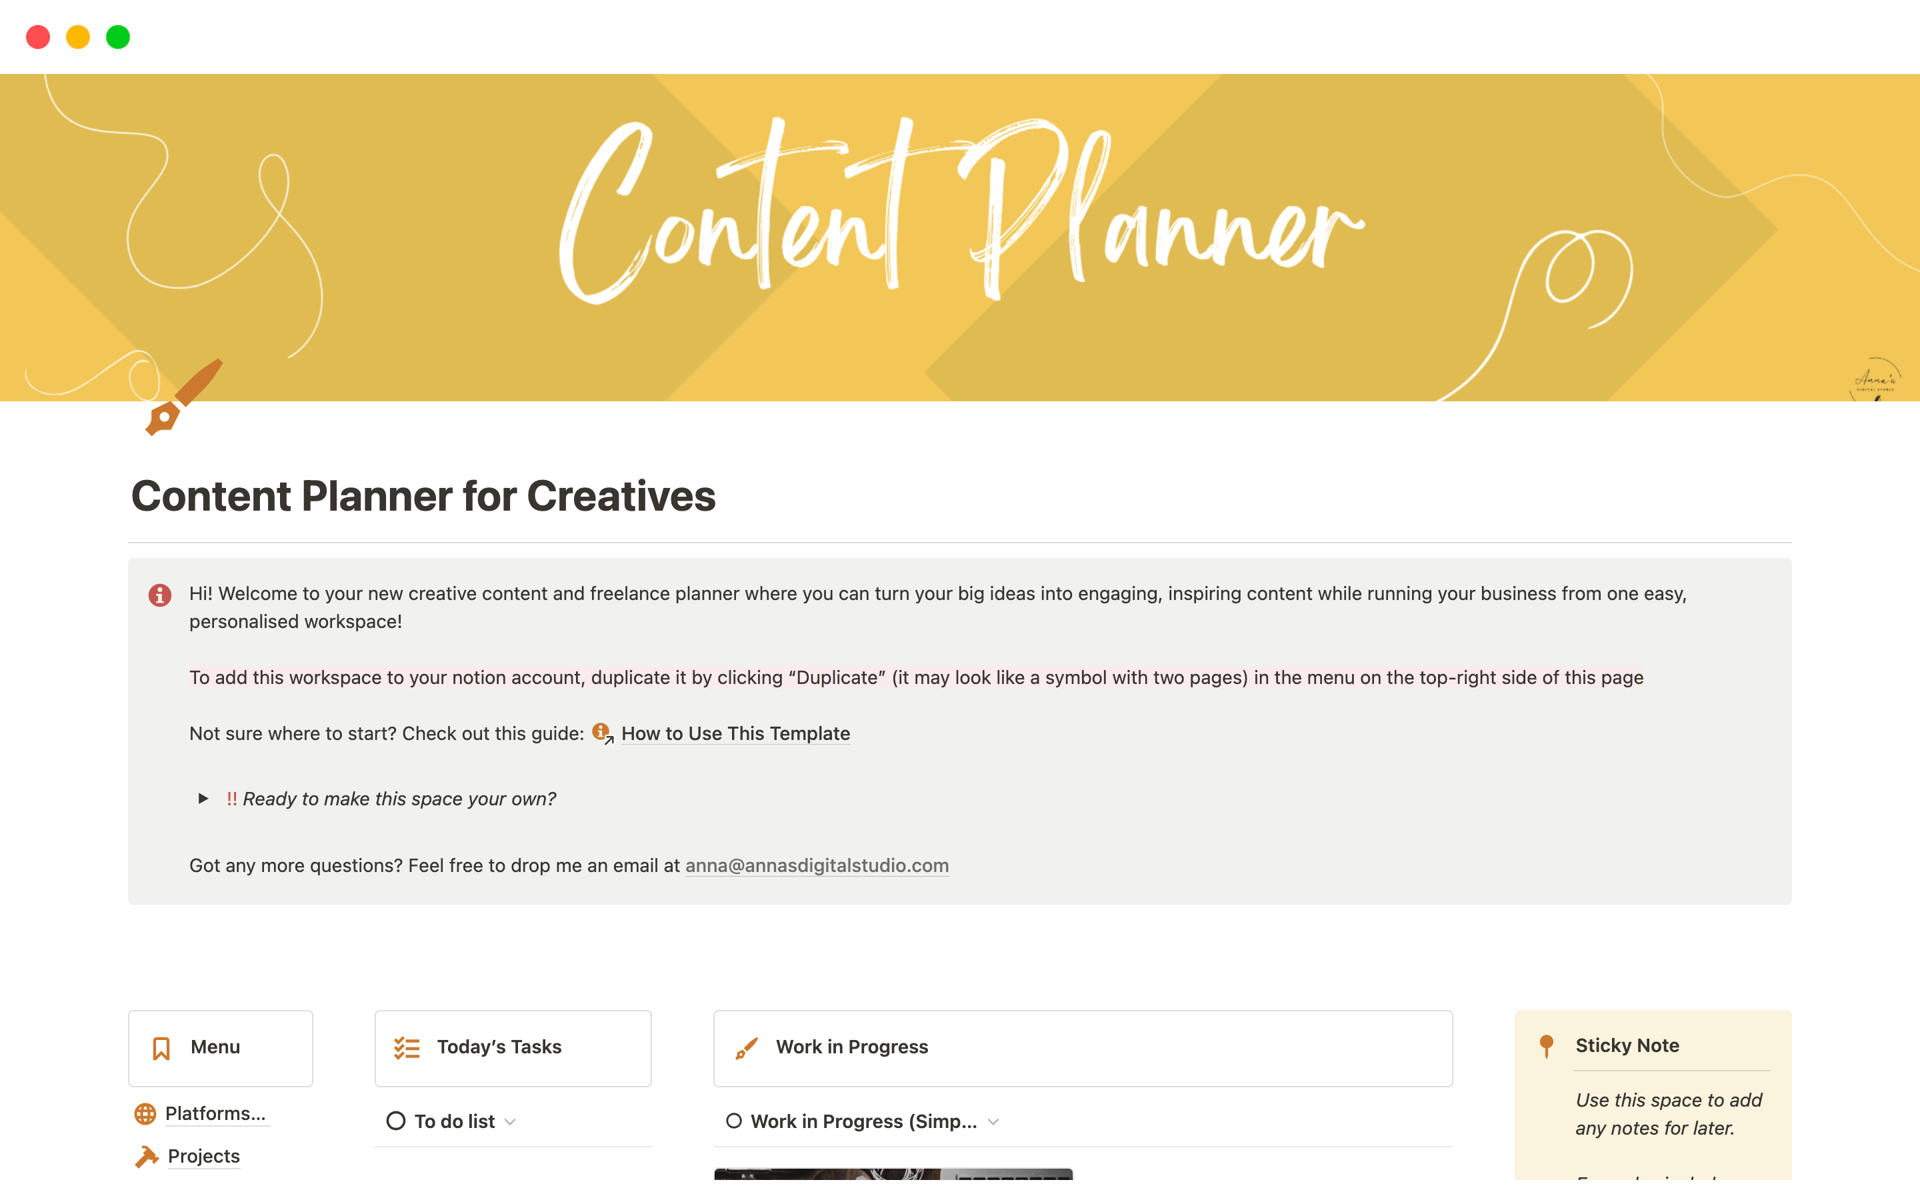 Content Planner for Freelancers and Creativesのテンプレートのプレビュー